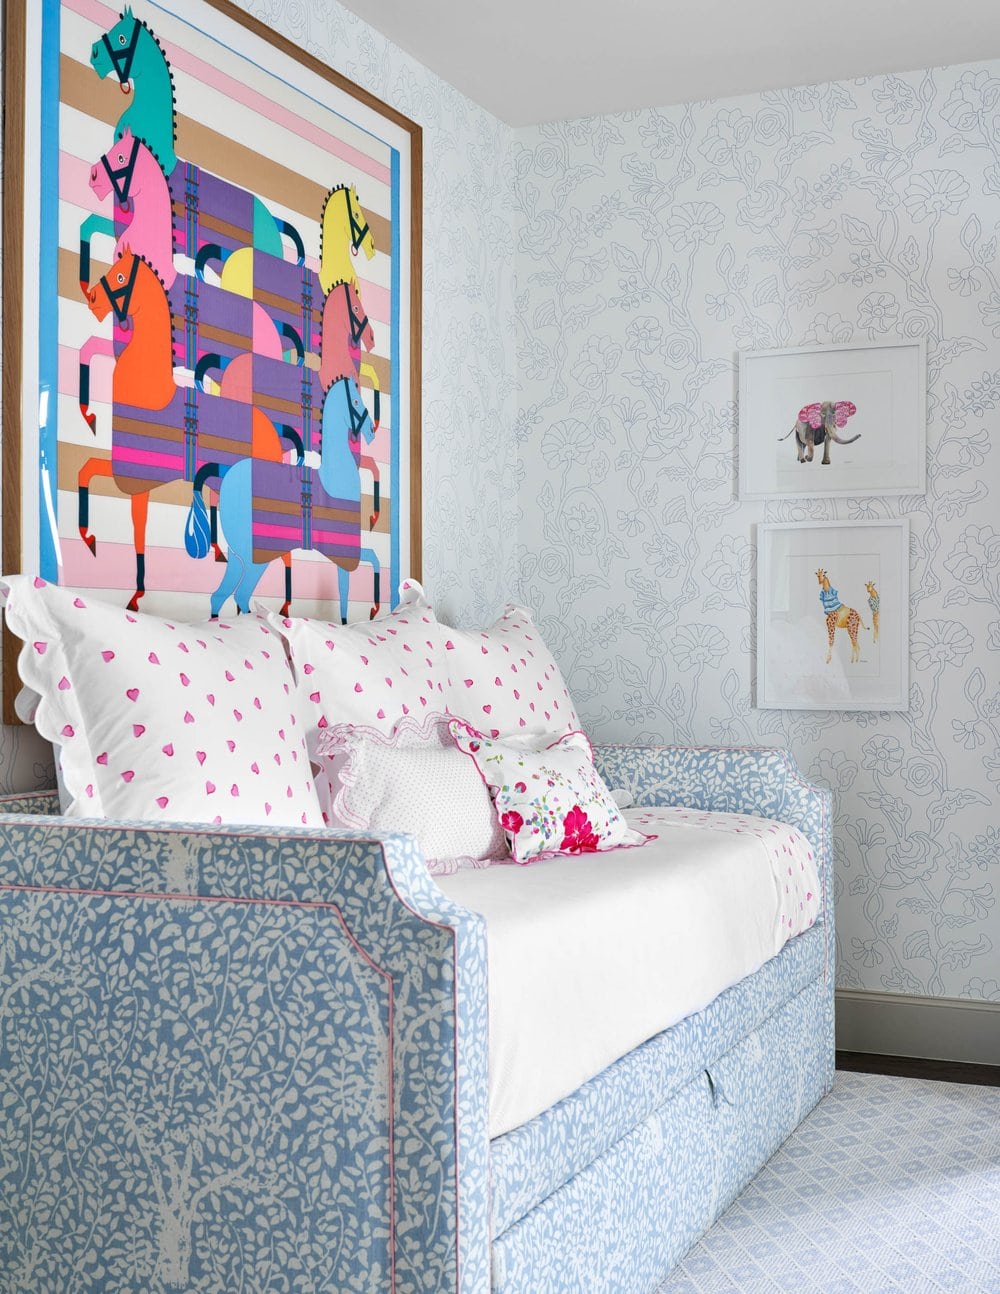 Delightful Dallas home from Designer Mary Beth Williams | Photography Nathan Schroder. Love the girl's bedroom with the colorful art and daybed